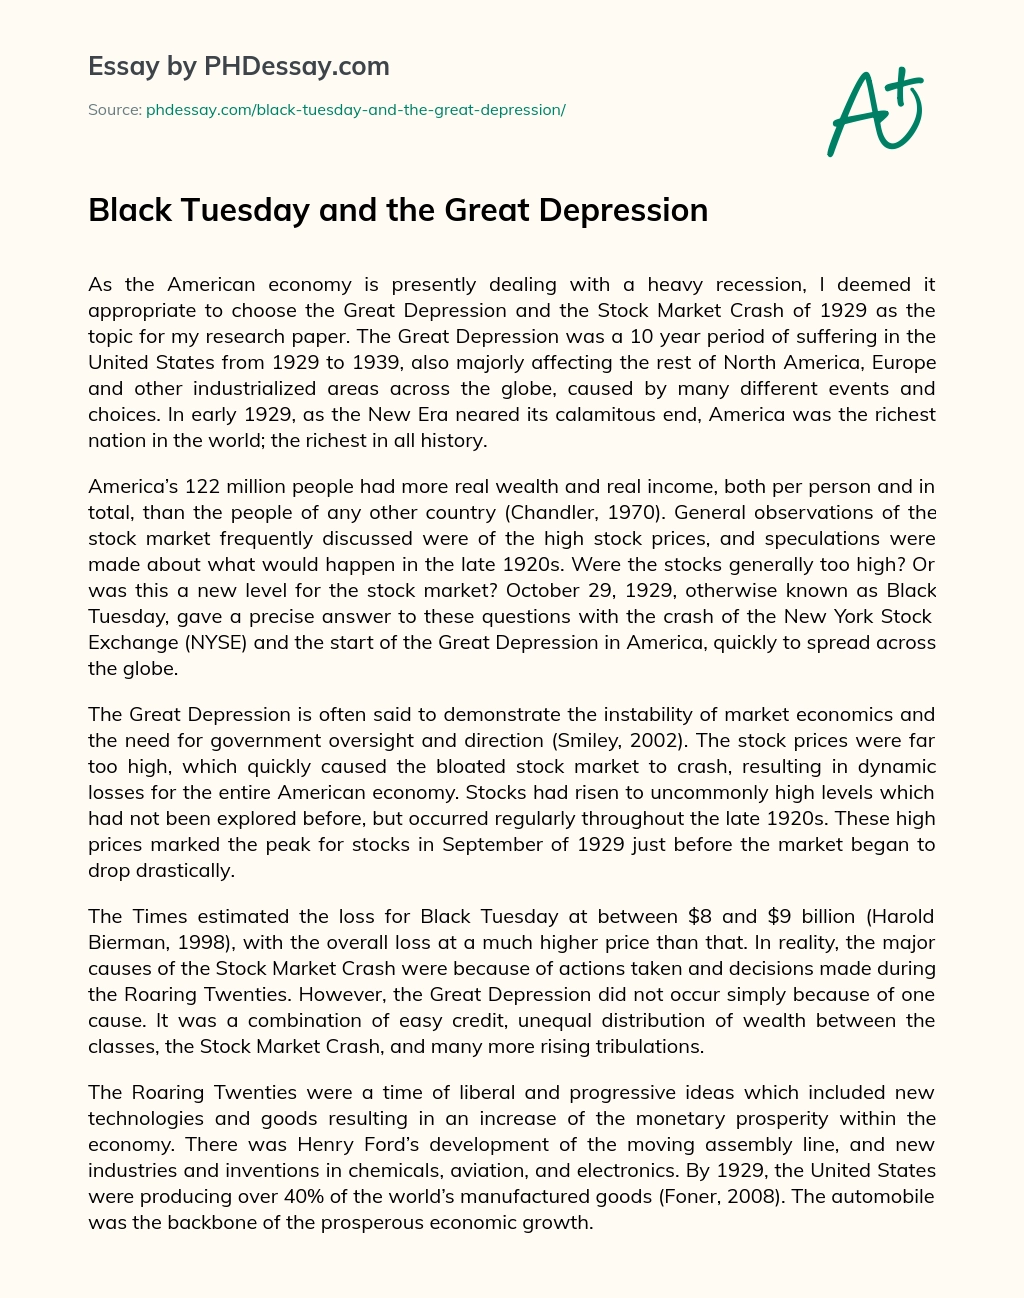 Black Tuesday and the Great Depression essay